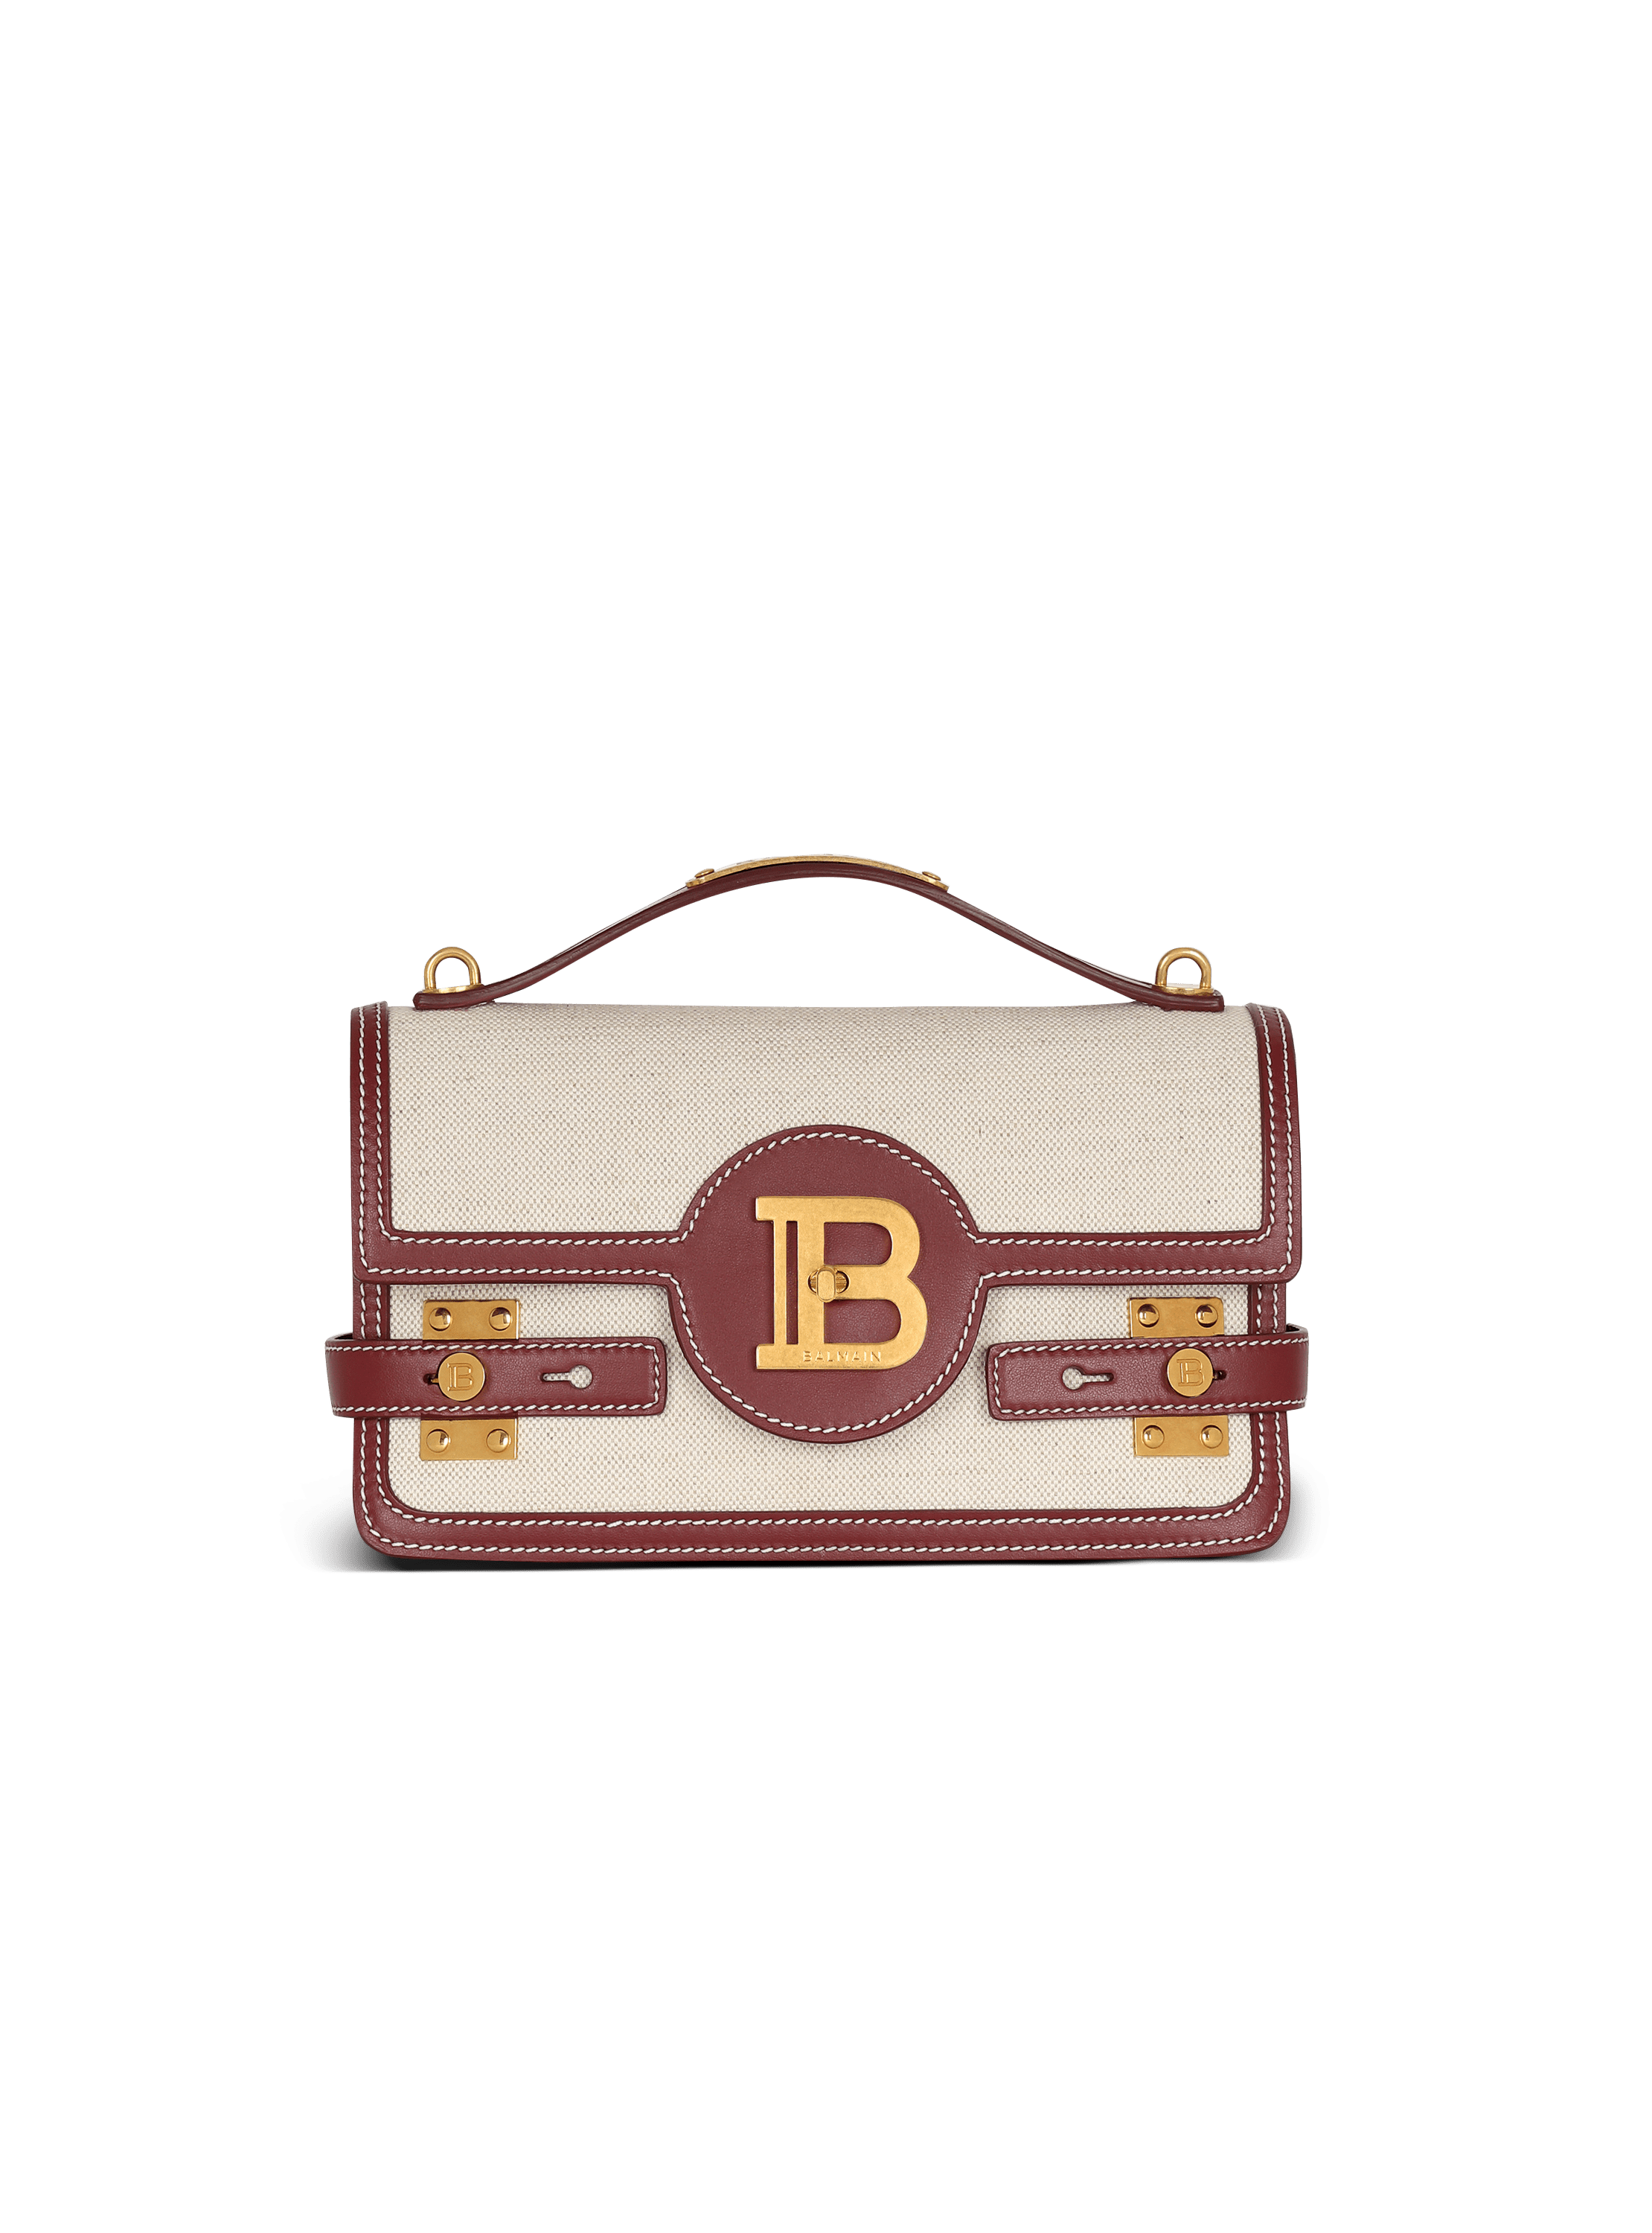 B-Buzz 24 canvas and leather bag